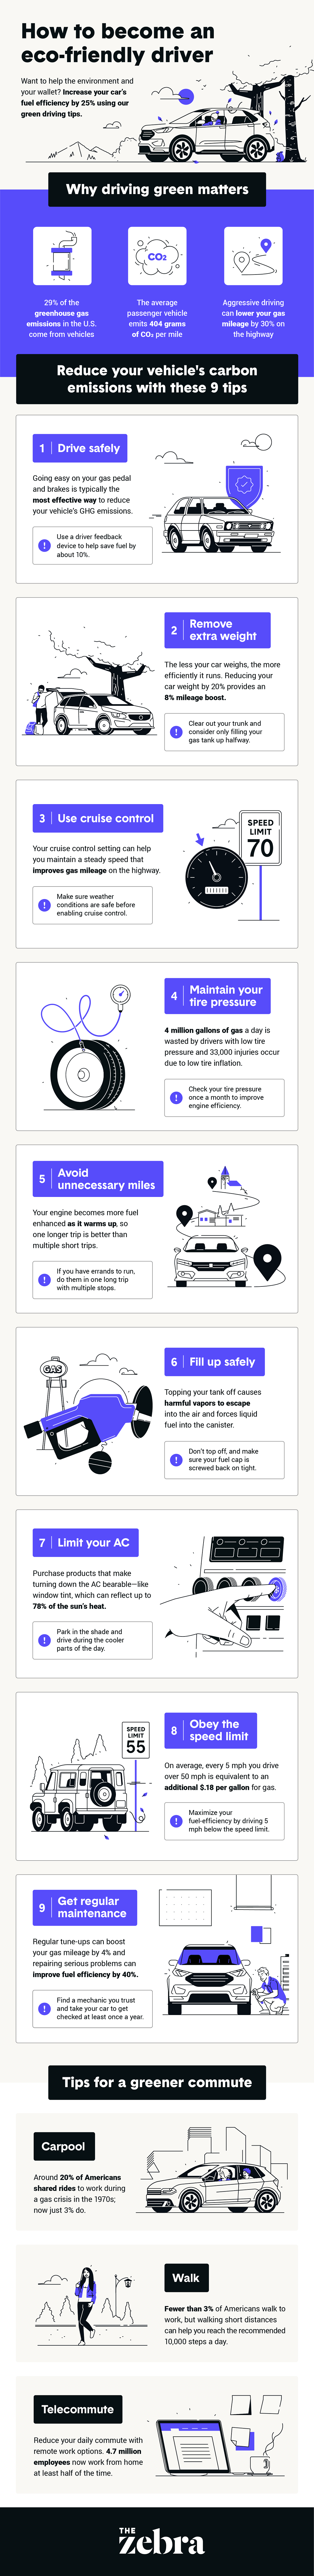 Infographic: How To Become an Eco-Friendly Driver